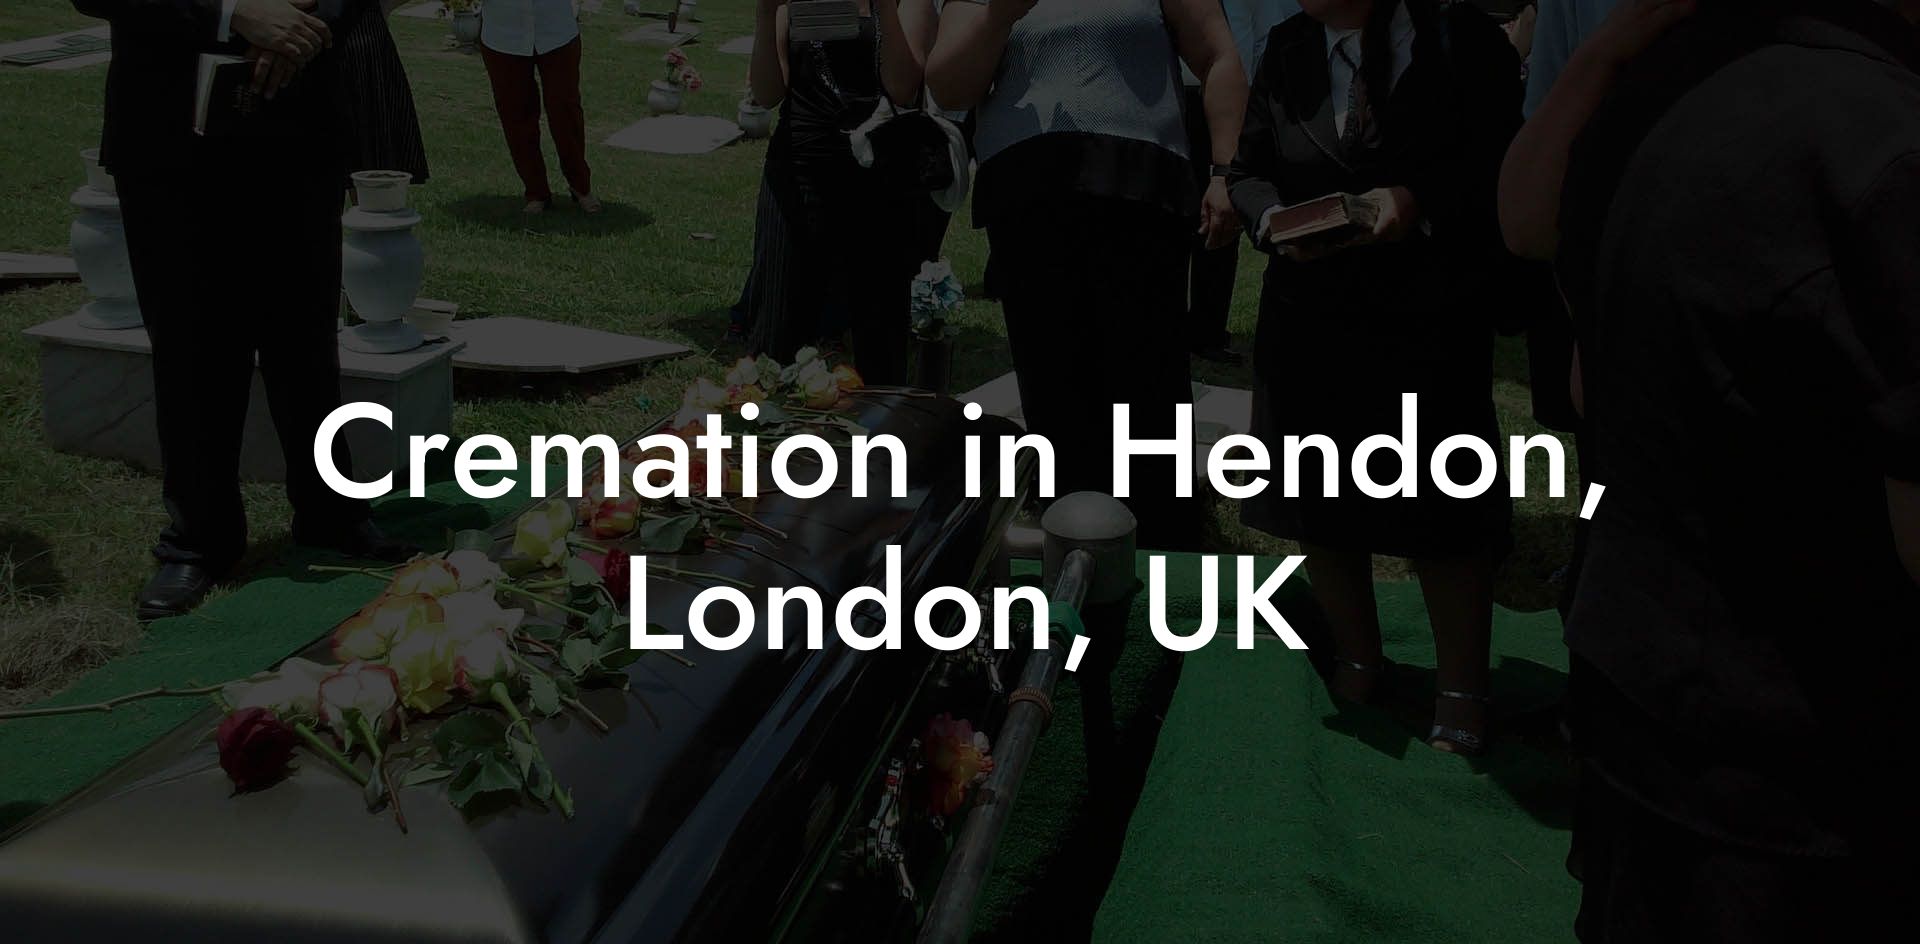 Cremation in Hendon, London, UK